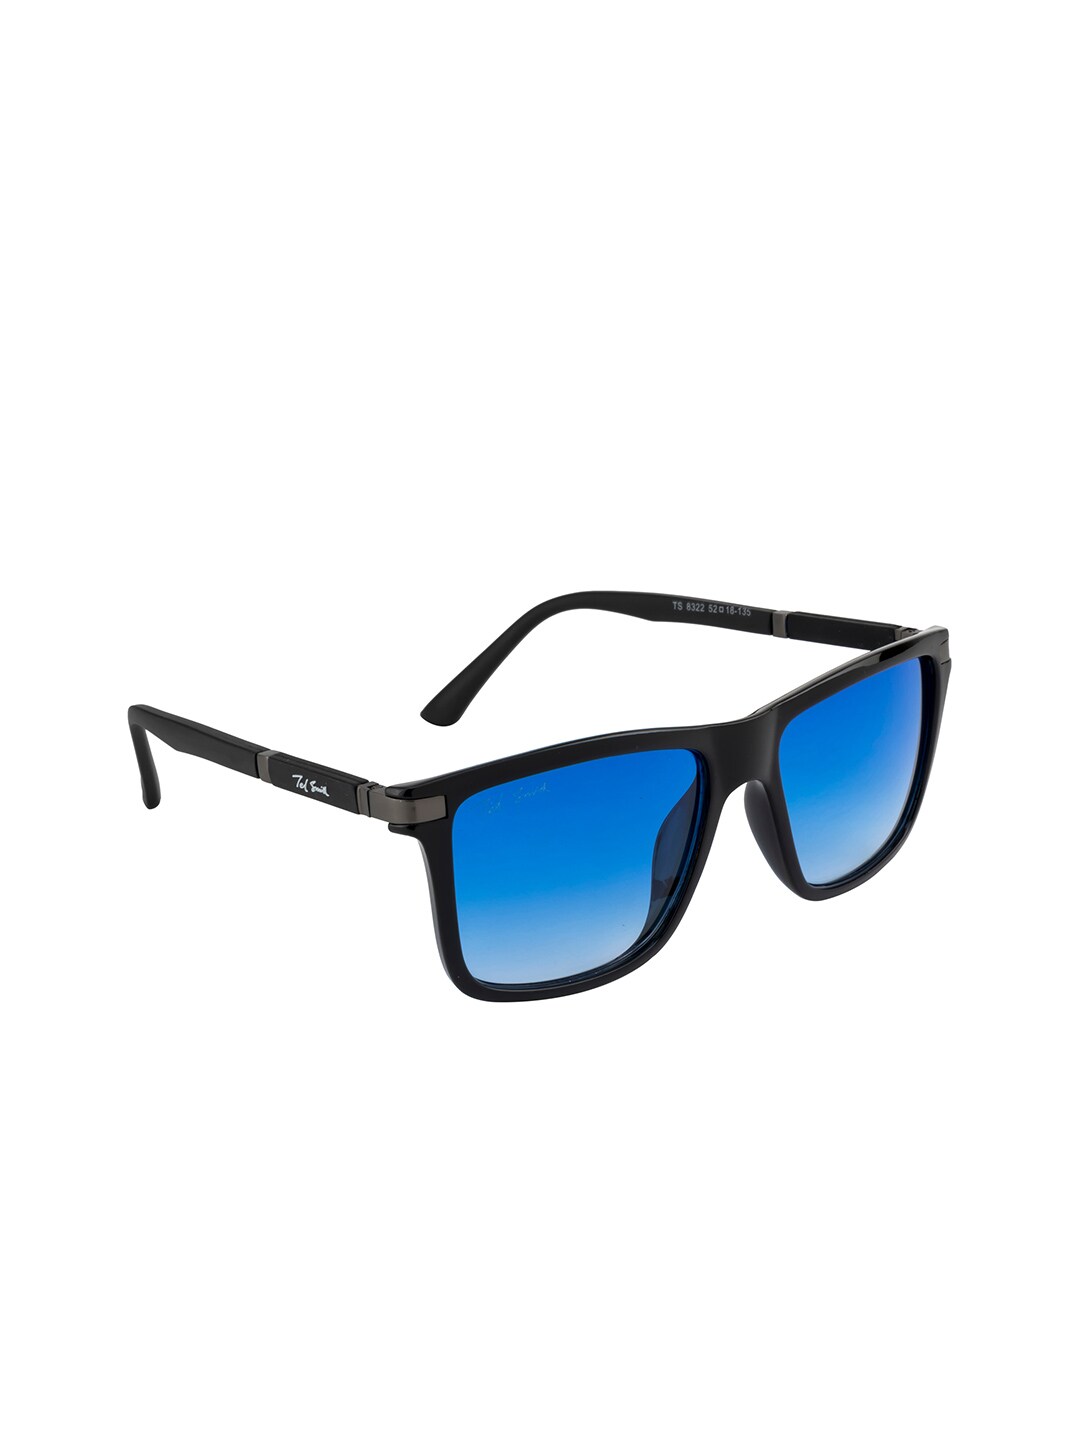 Ted Smith Unisex Blue Lens & Black Square Sunglasses with UV Protected Lens BOXBEAT_C3